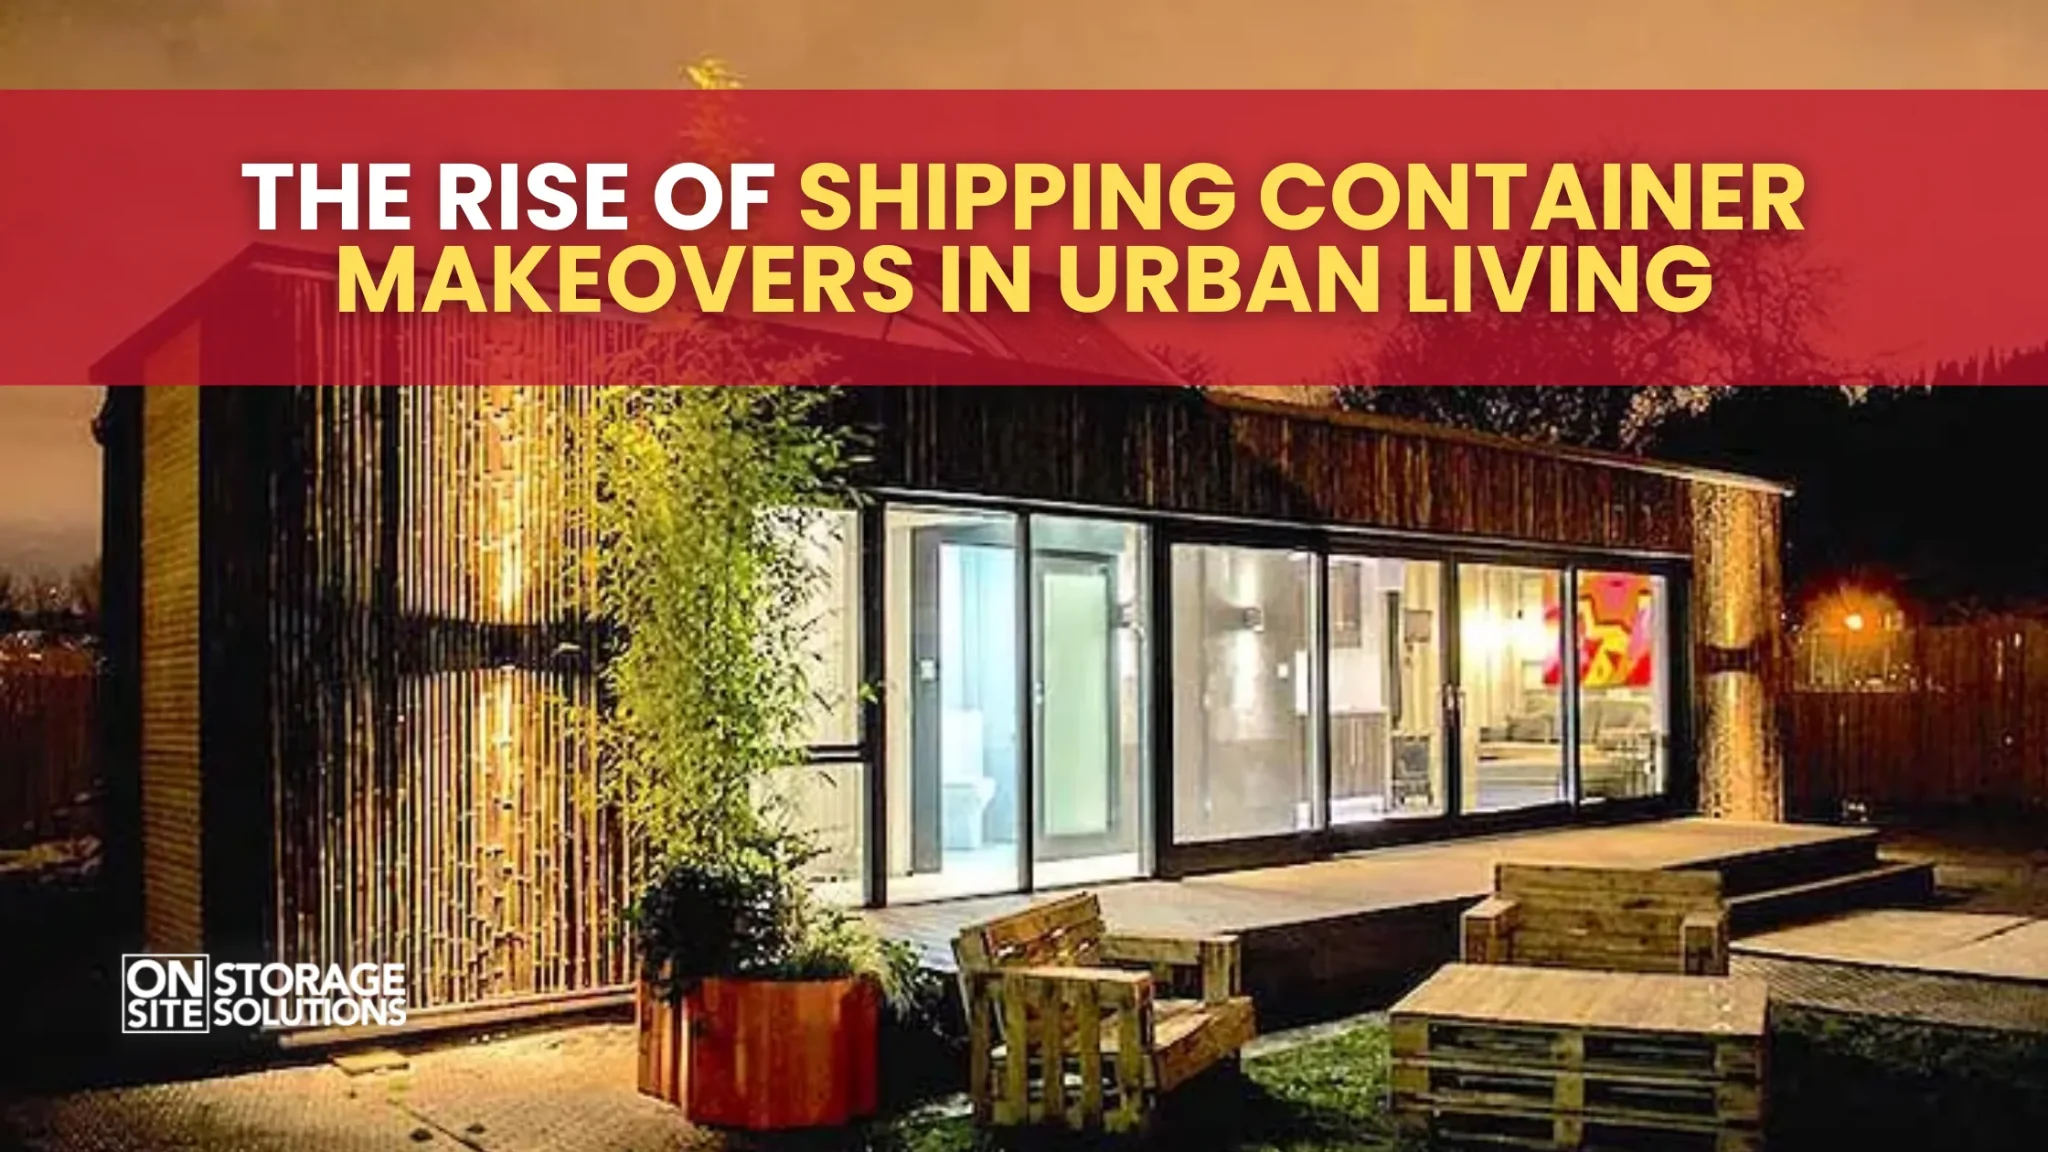 The Rise of Shipping Container Makeovers in Urban Living